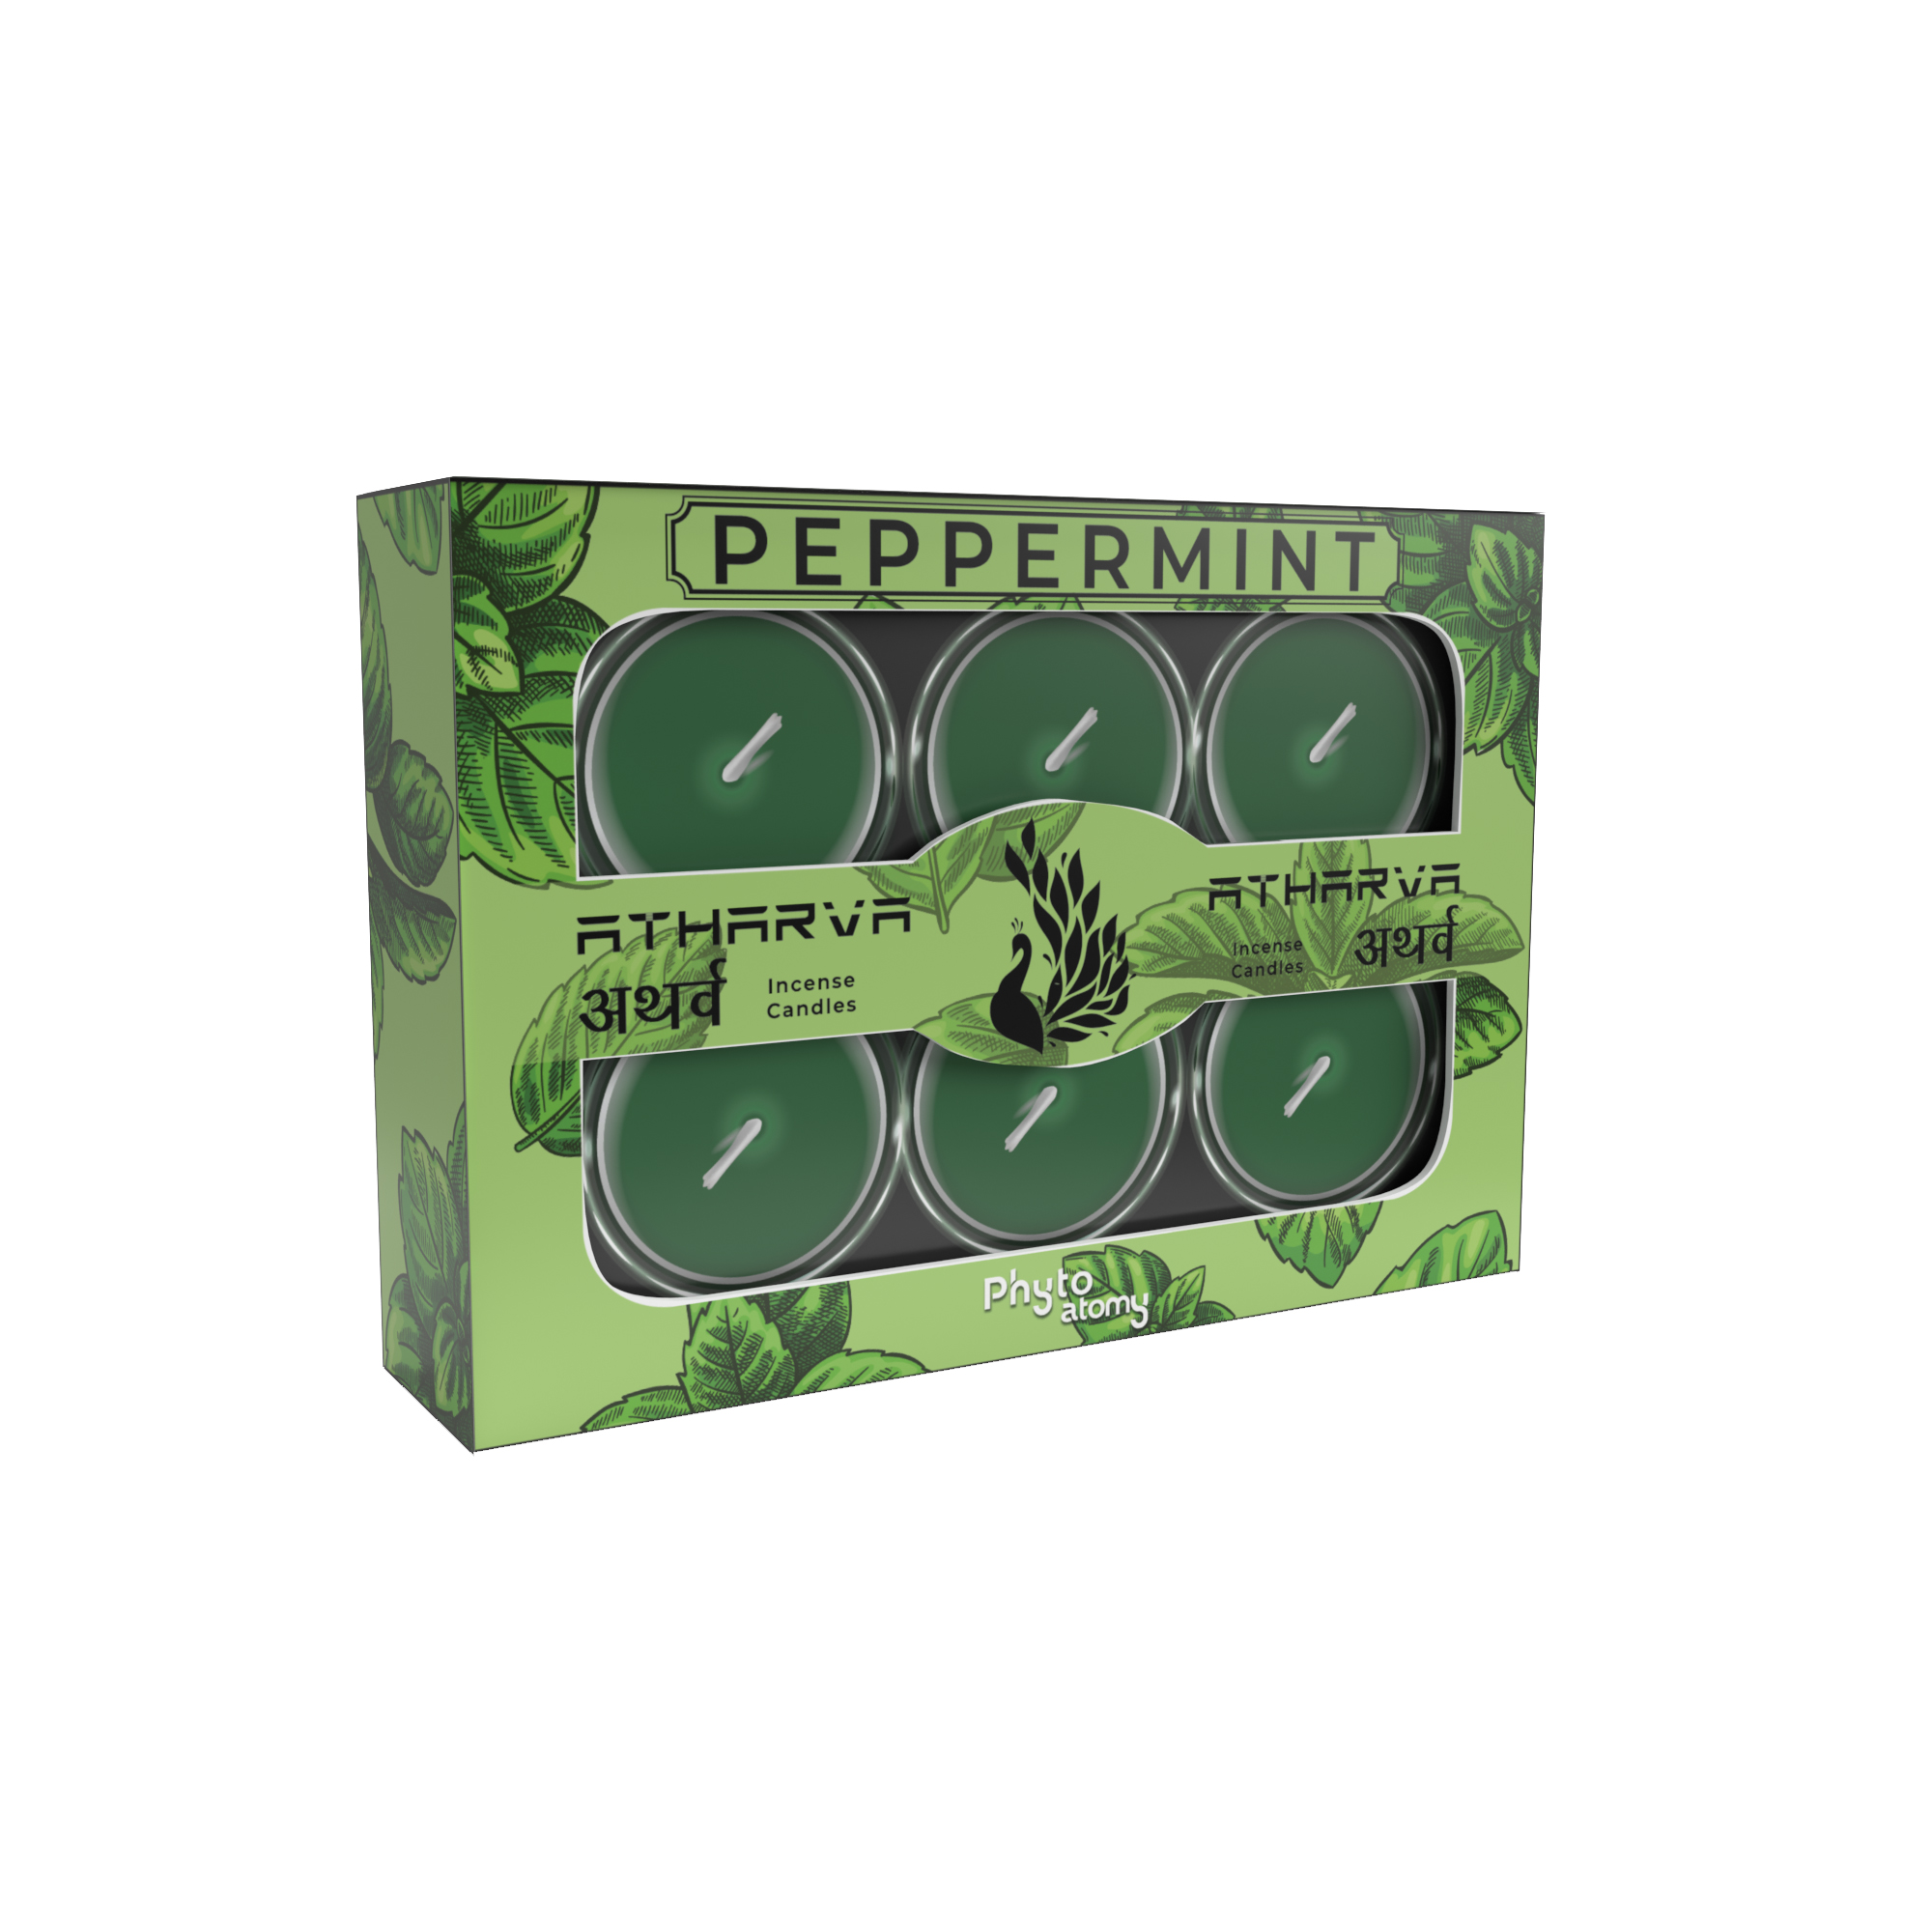 Peppermint Atharva Incense Candles (12 Pcs.)